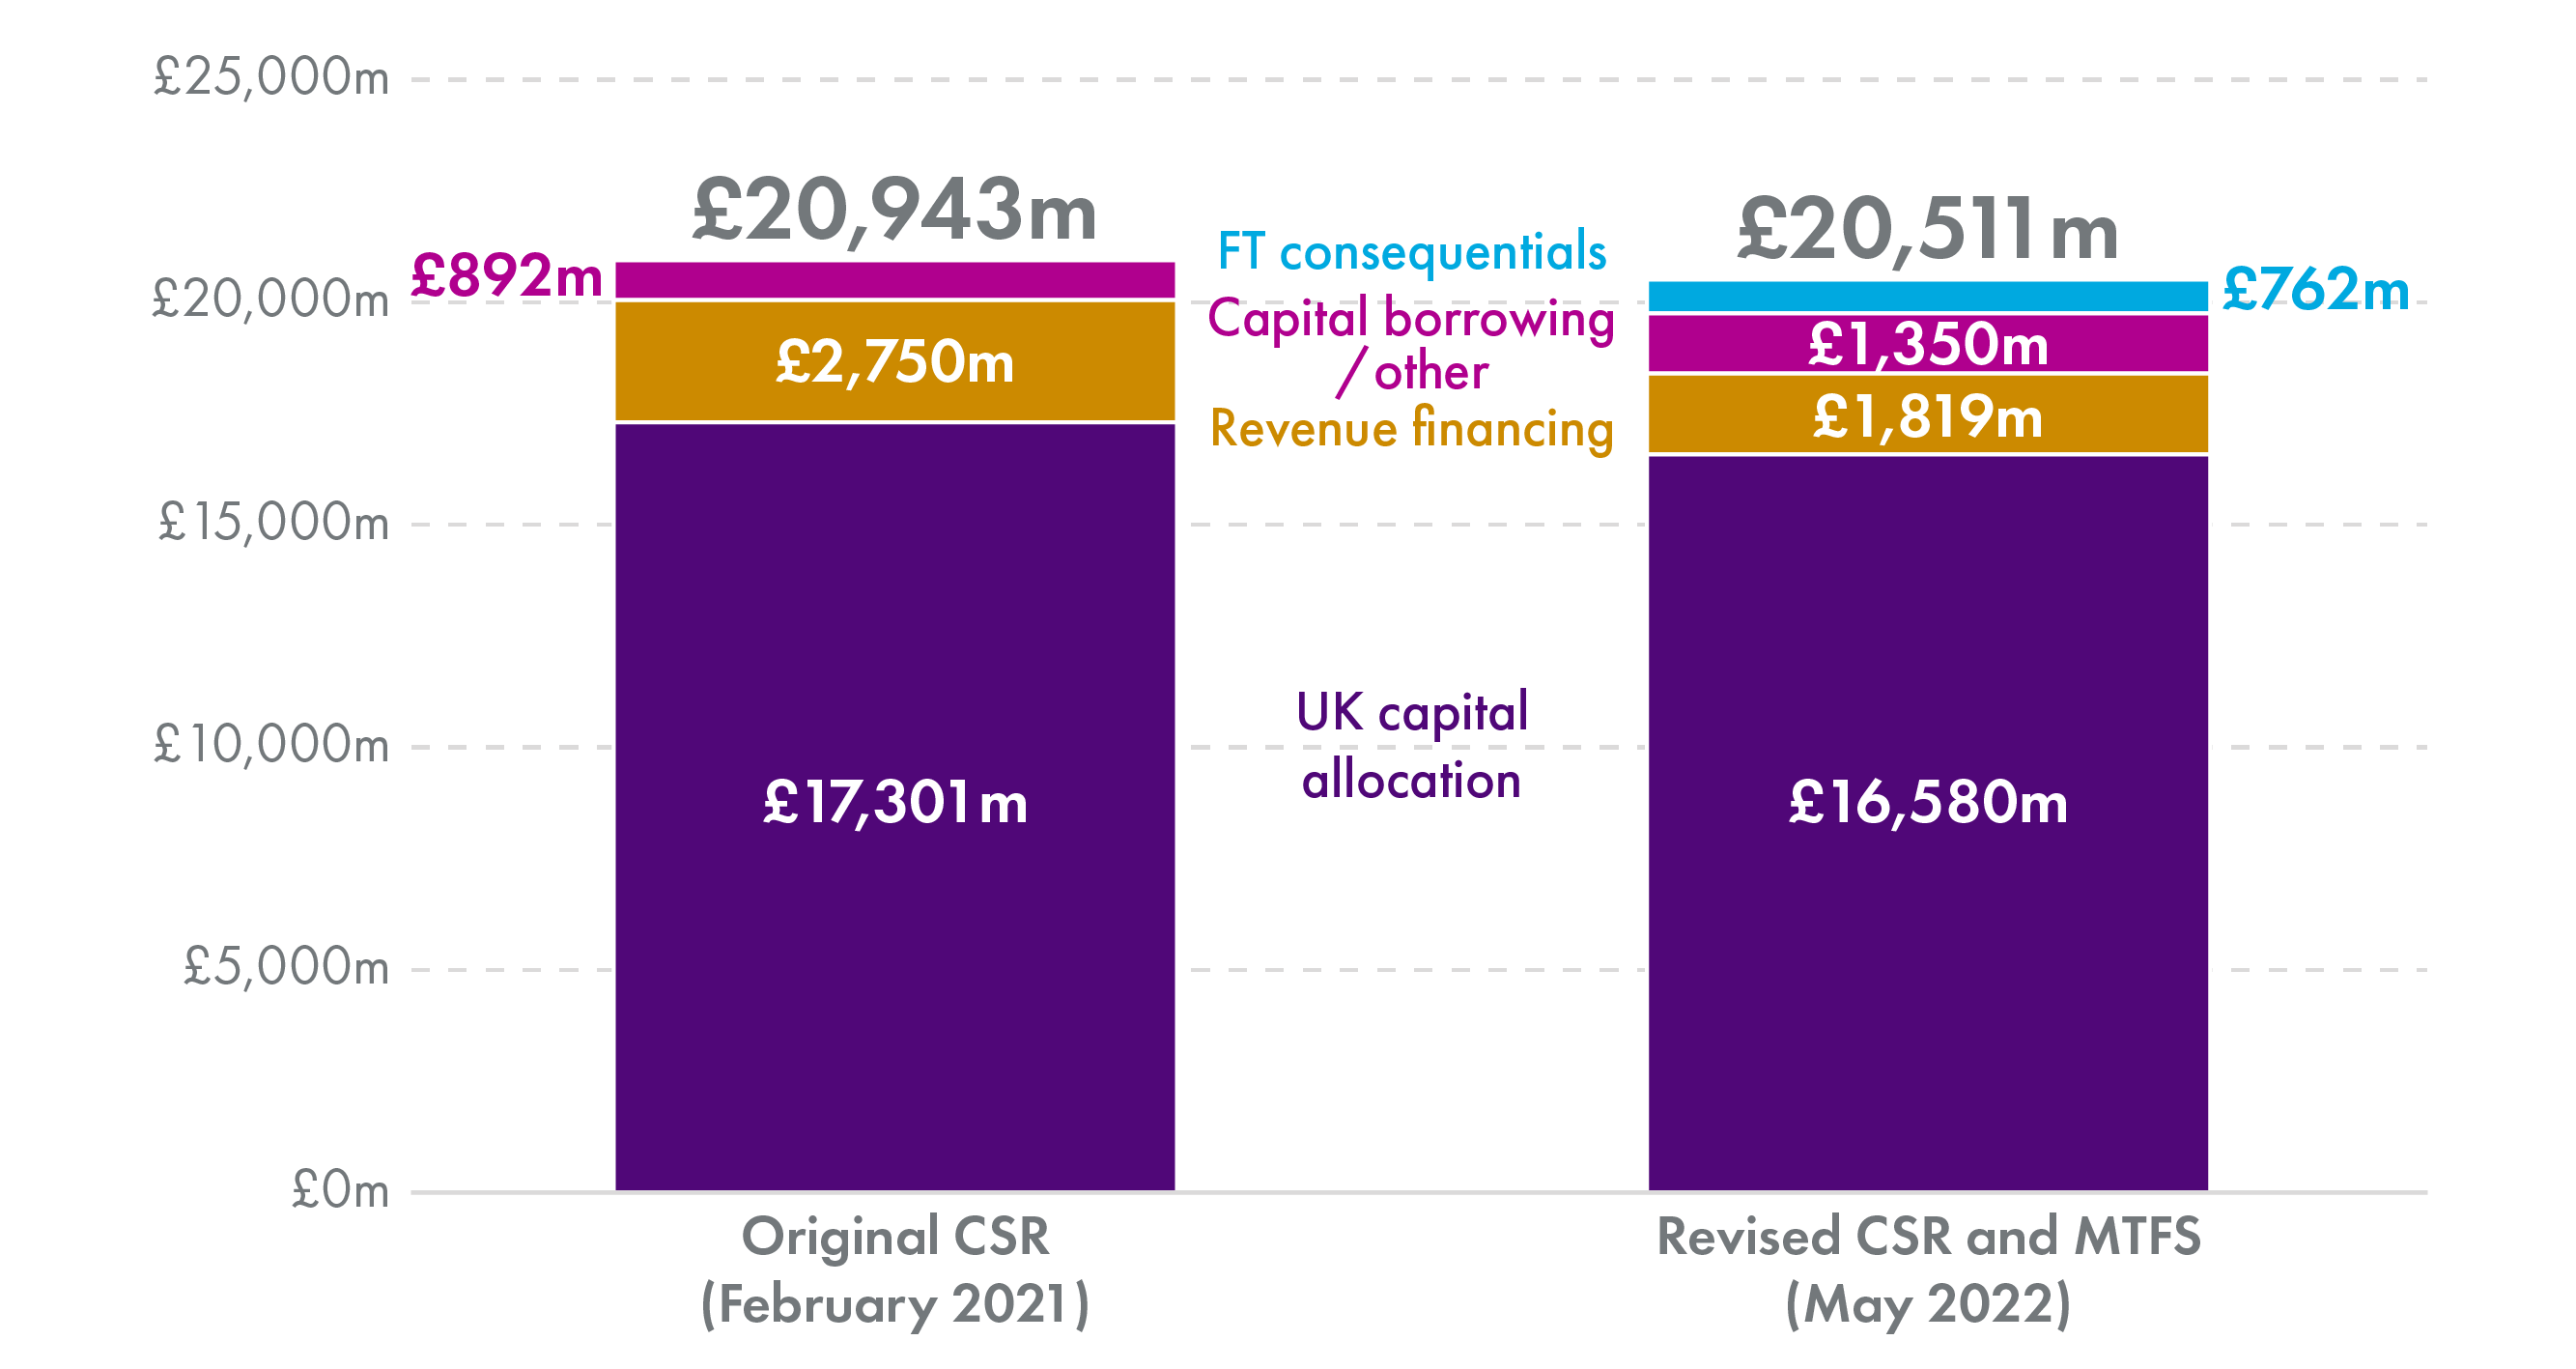 Bar chart showing the different components of planned capital spending between February 2021 and May 2022.